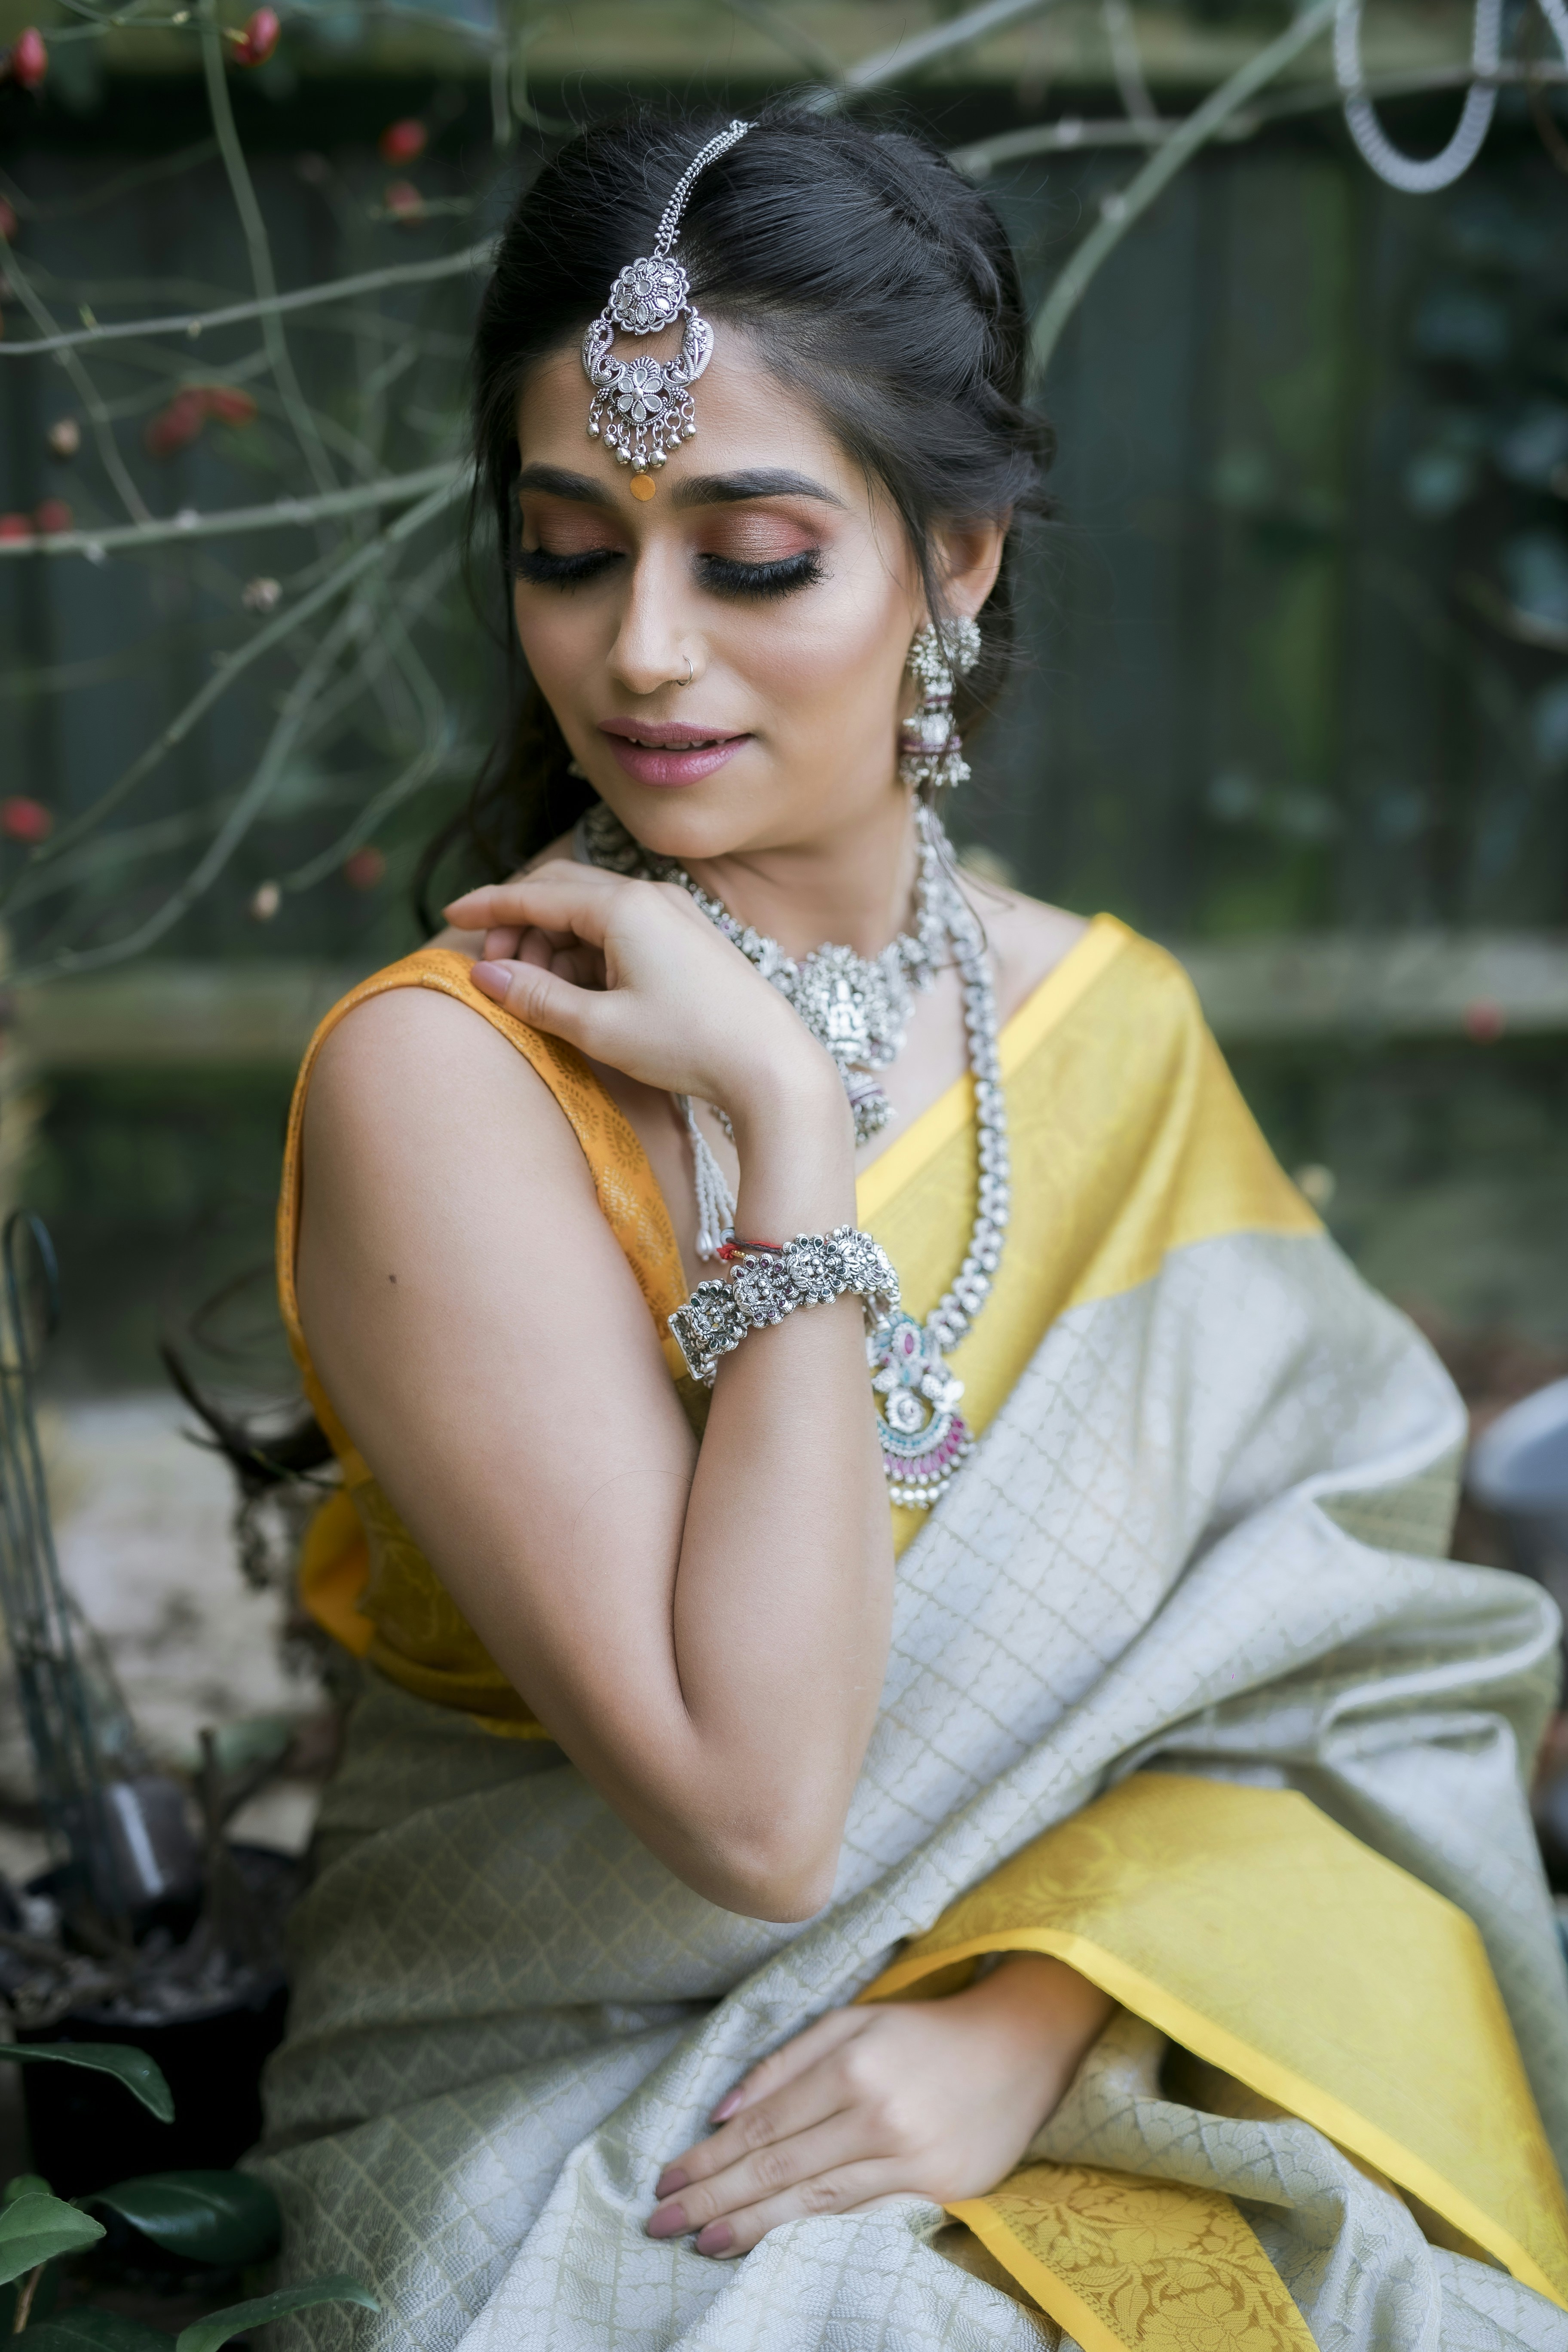 999+ Saree Photoshoot Pictures Download Free Images on Unsplash